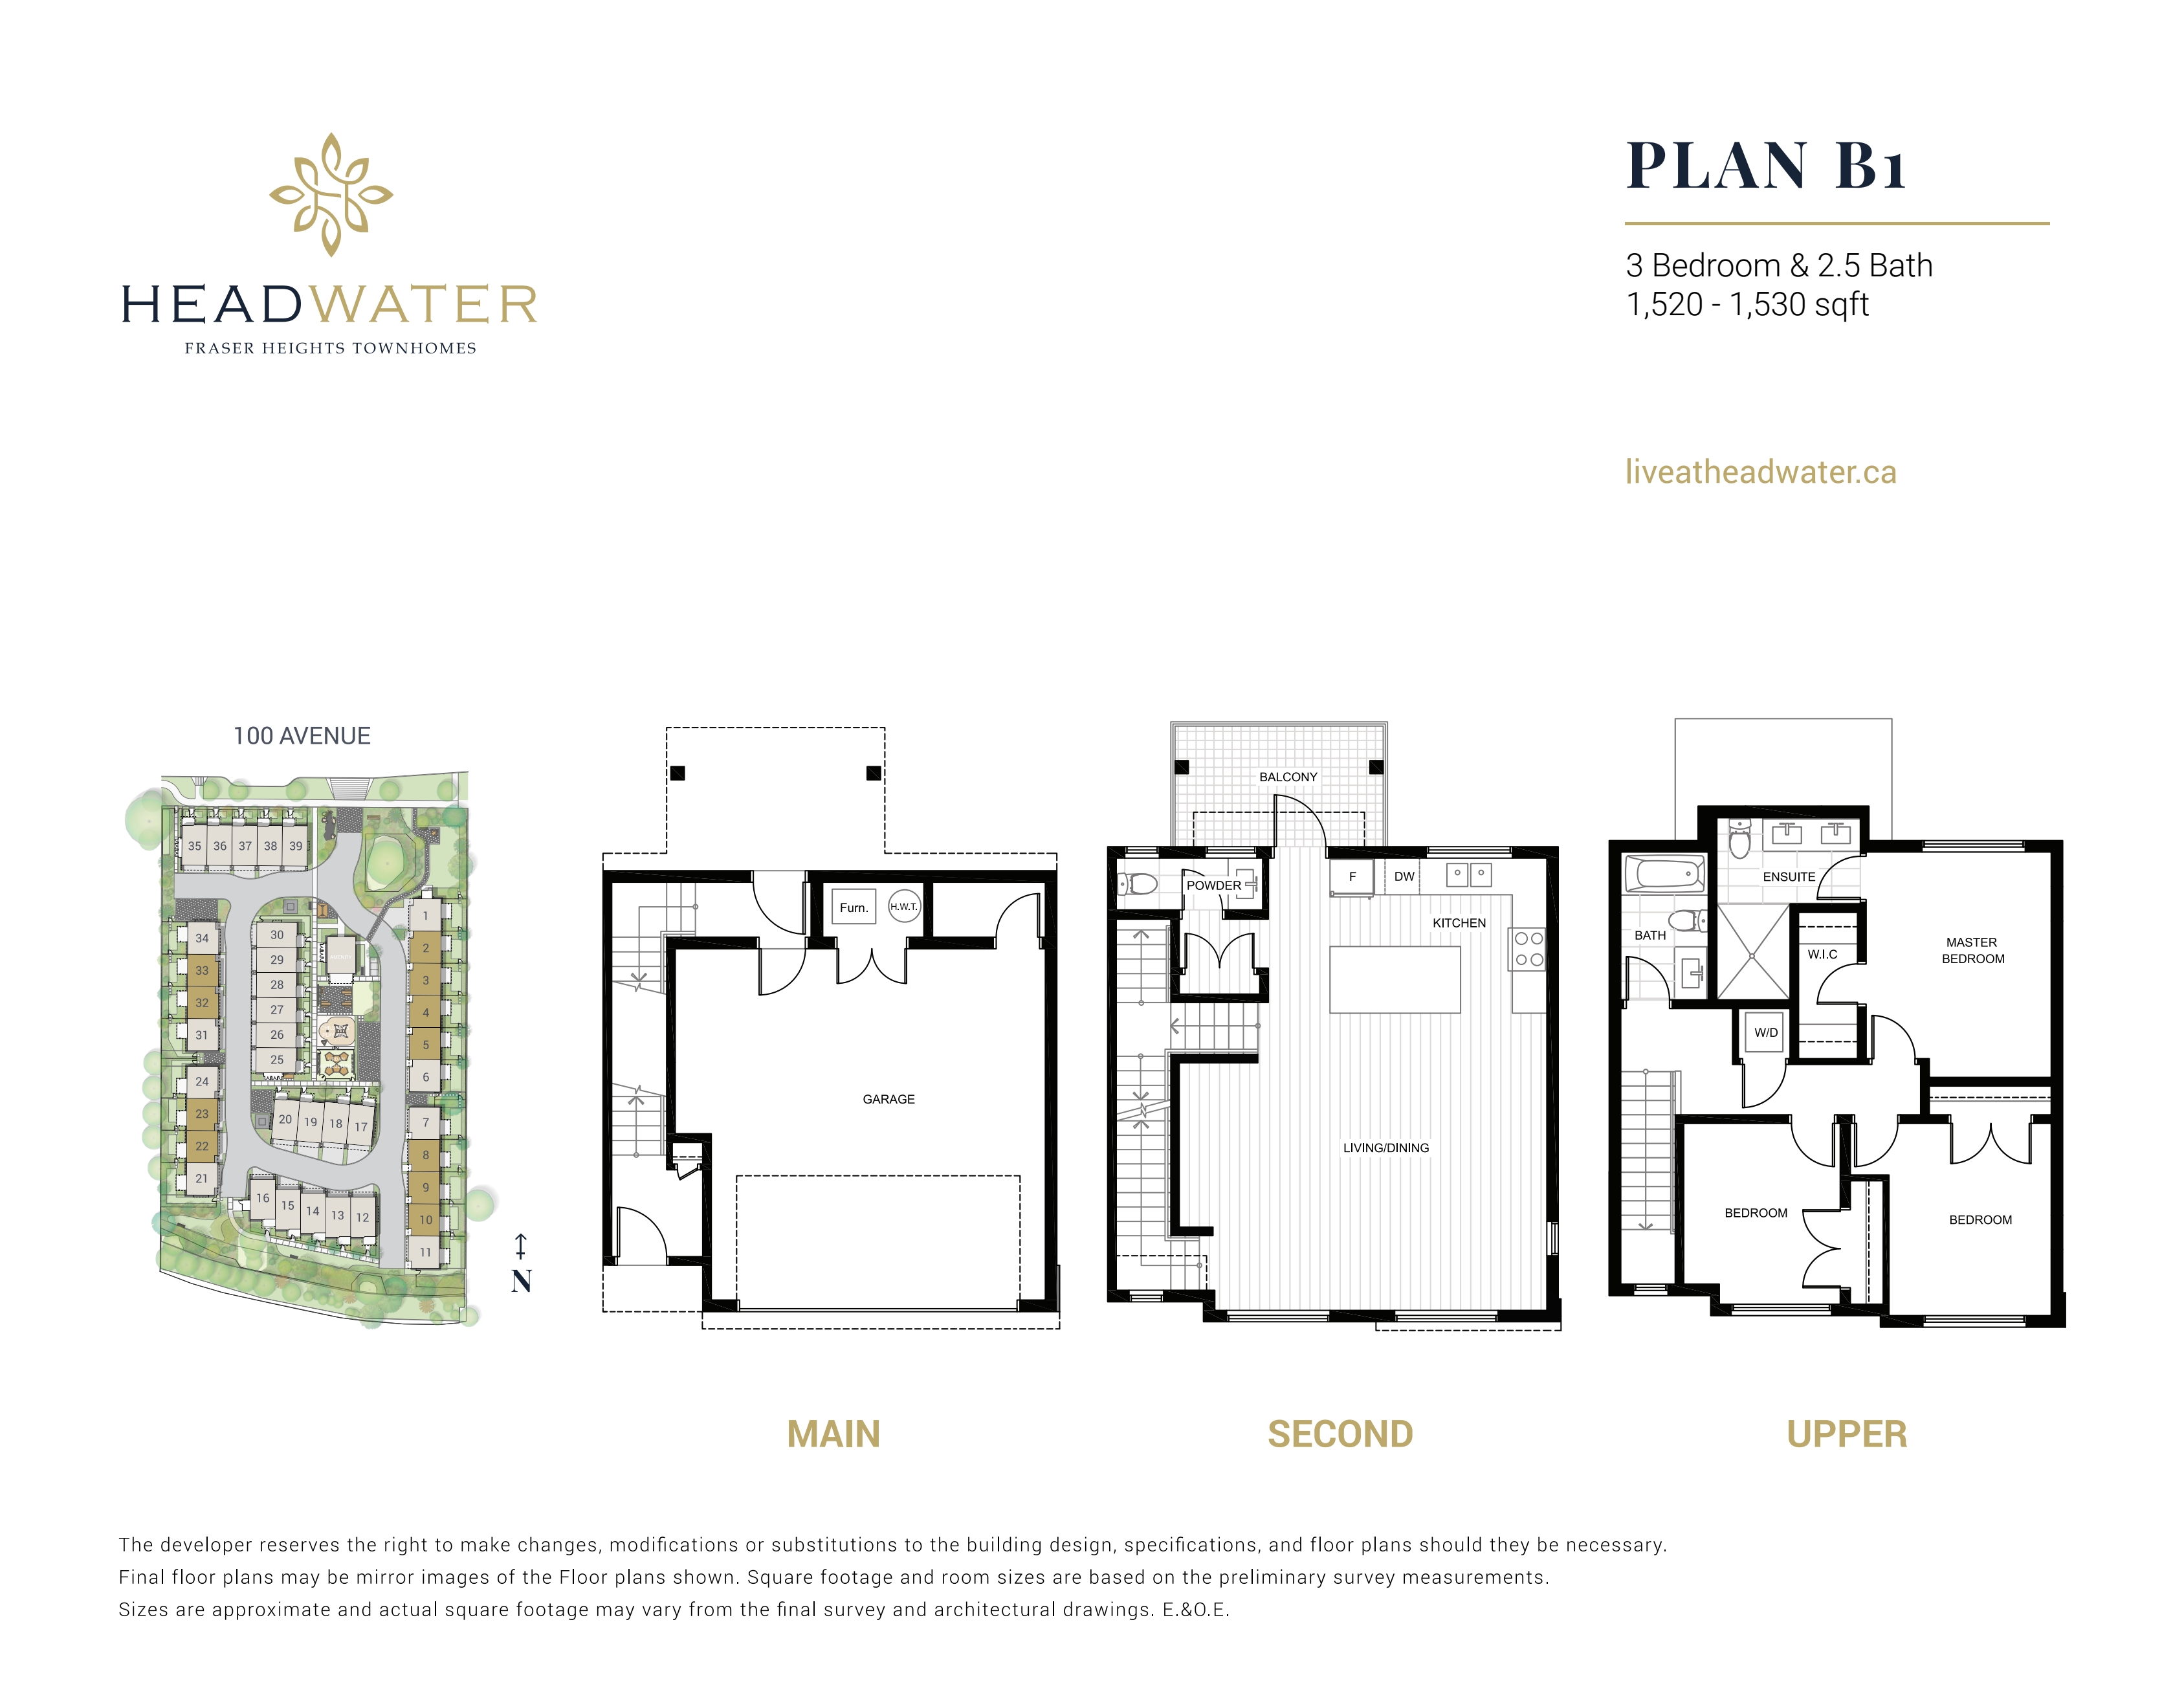 B1 Floor Plan of Headwater Towns with undefined beds